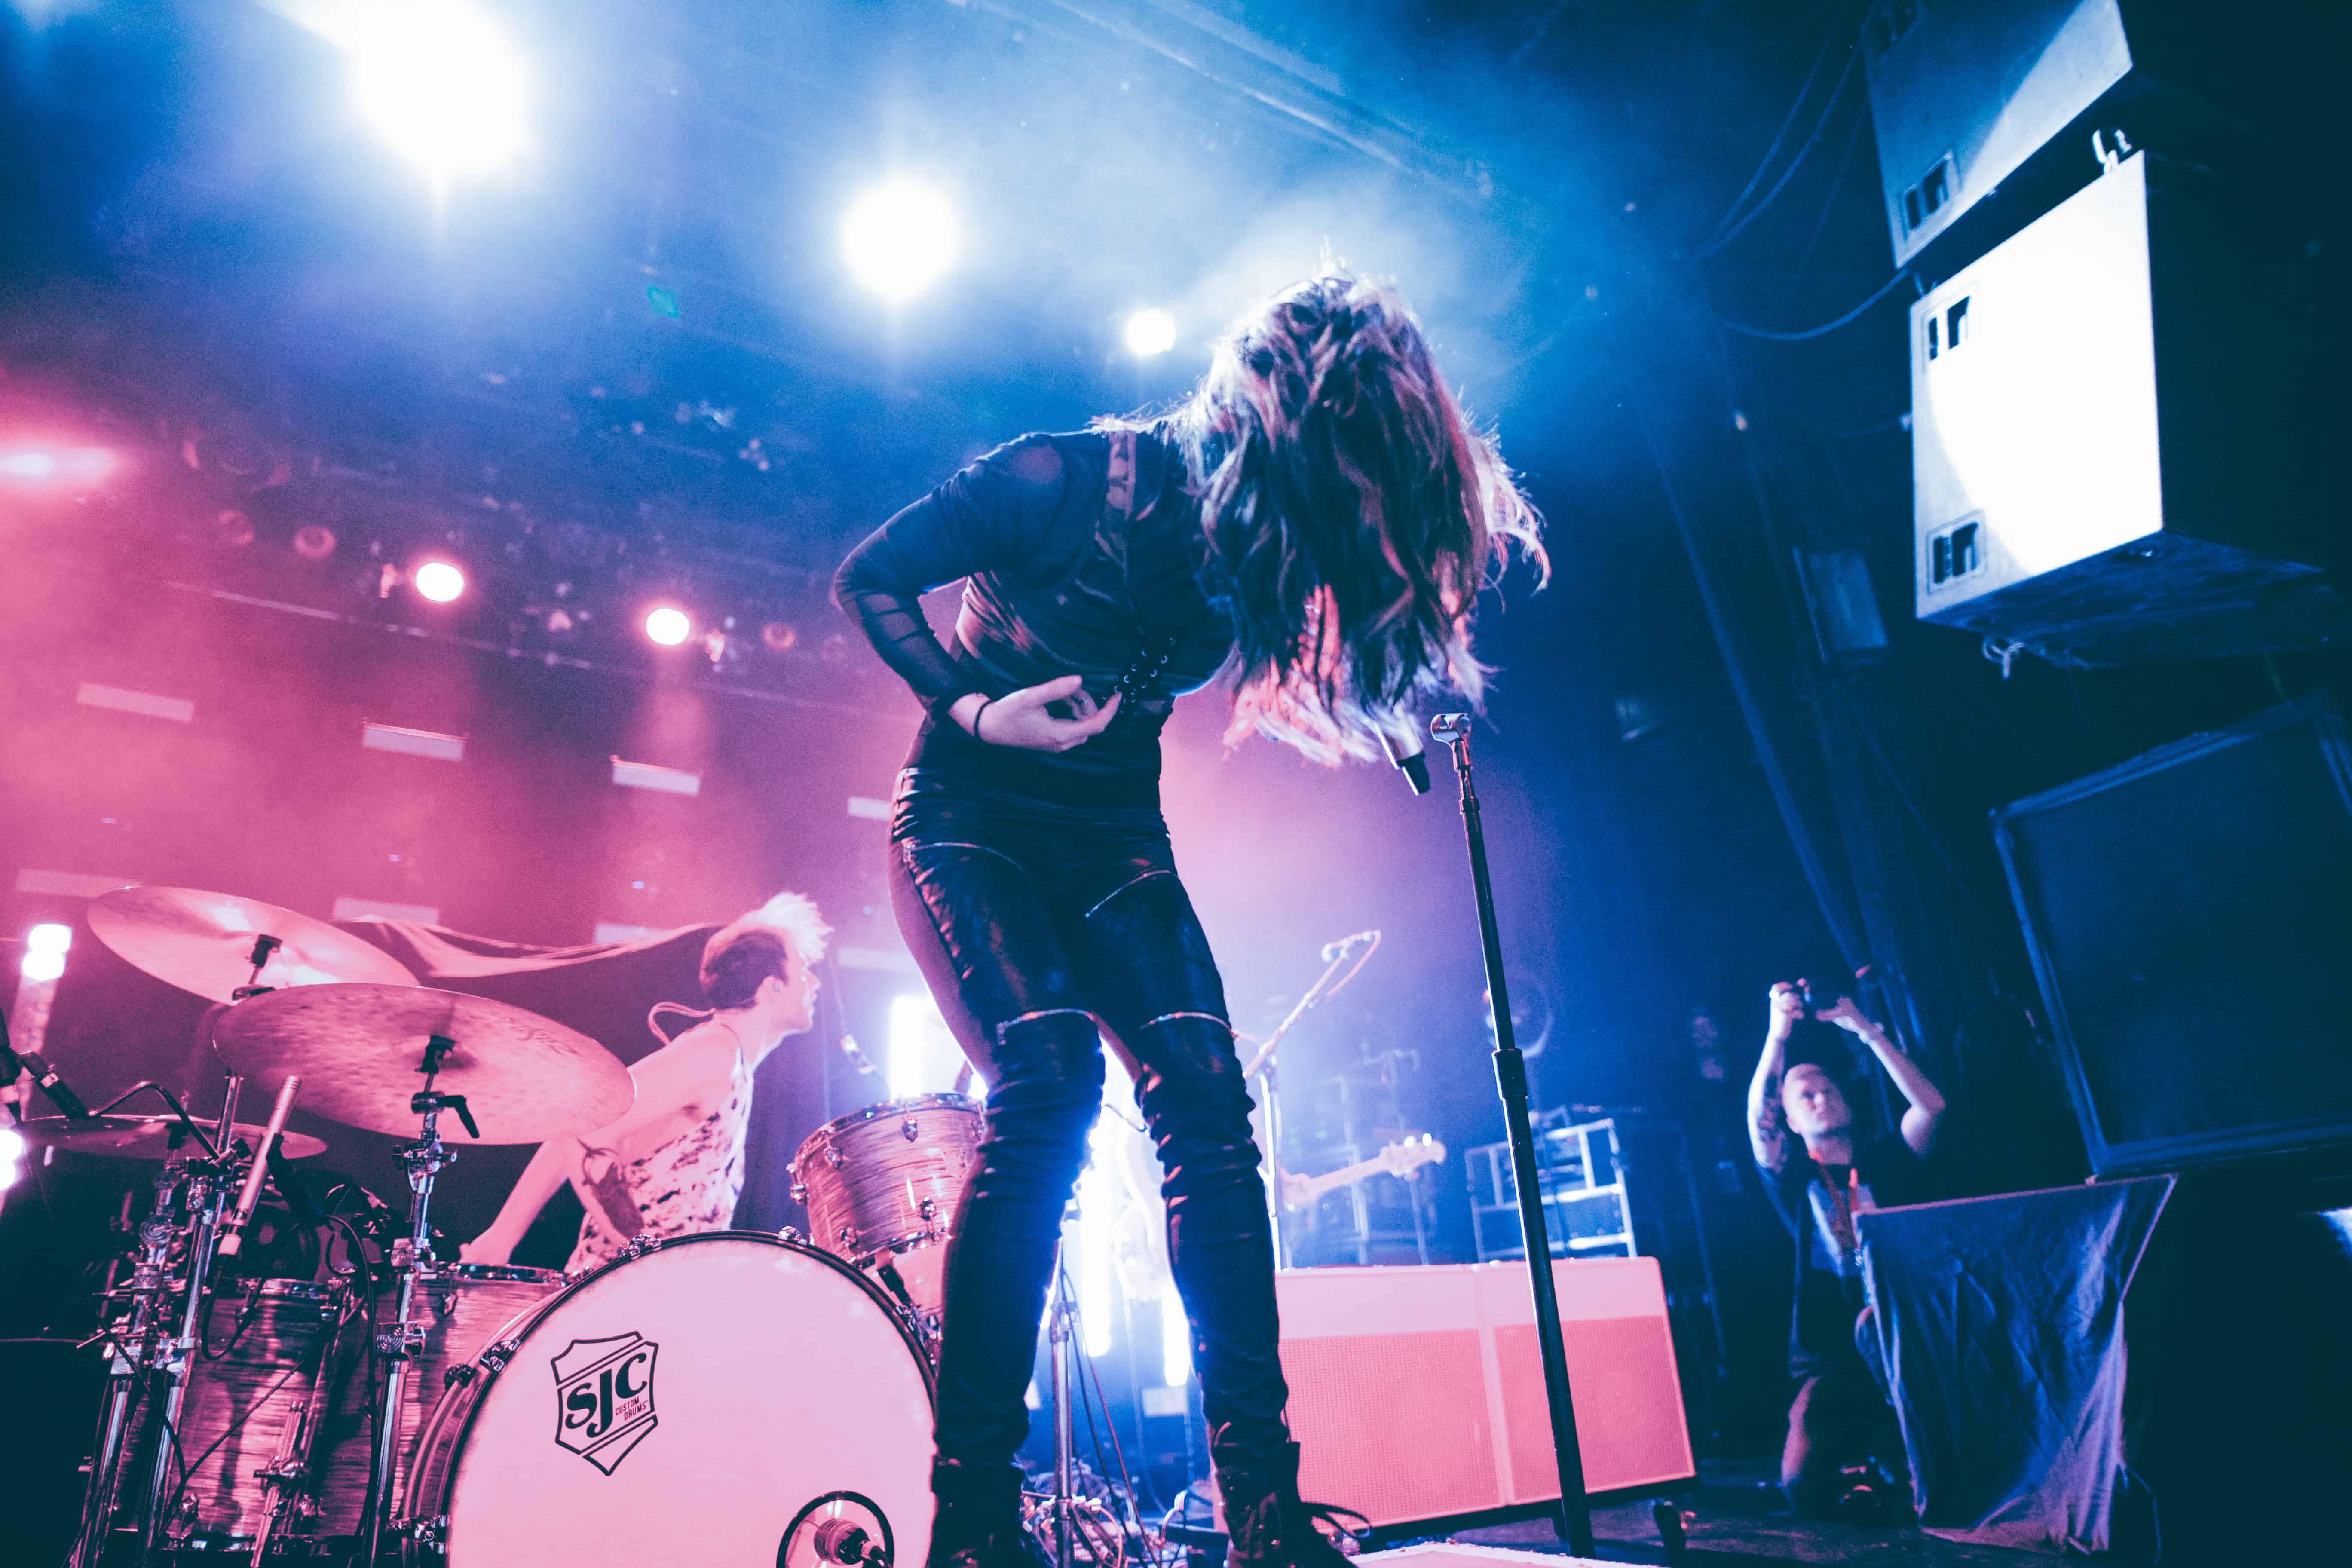 Chrissy Costanza of Against the Current. Photo by Jordyn Beschel.